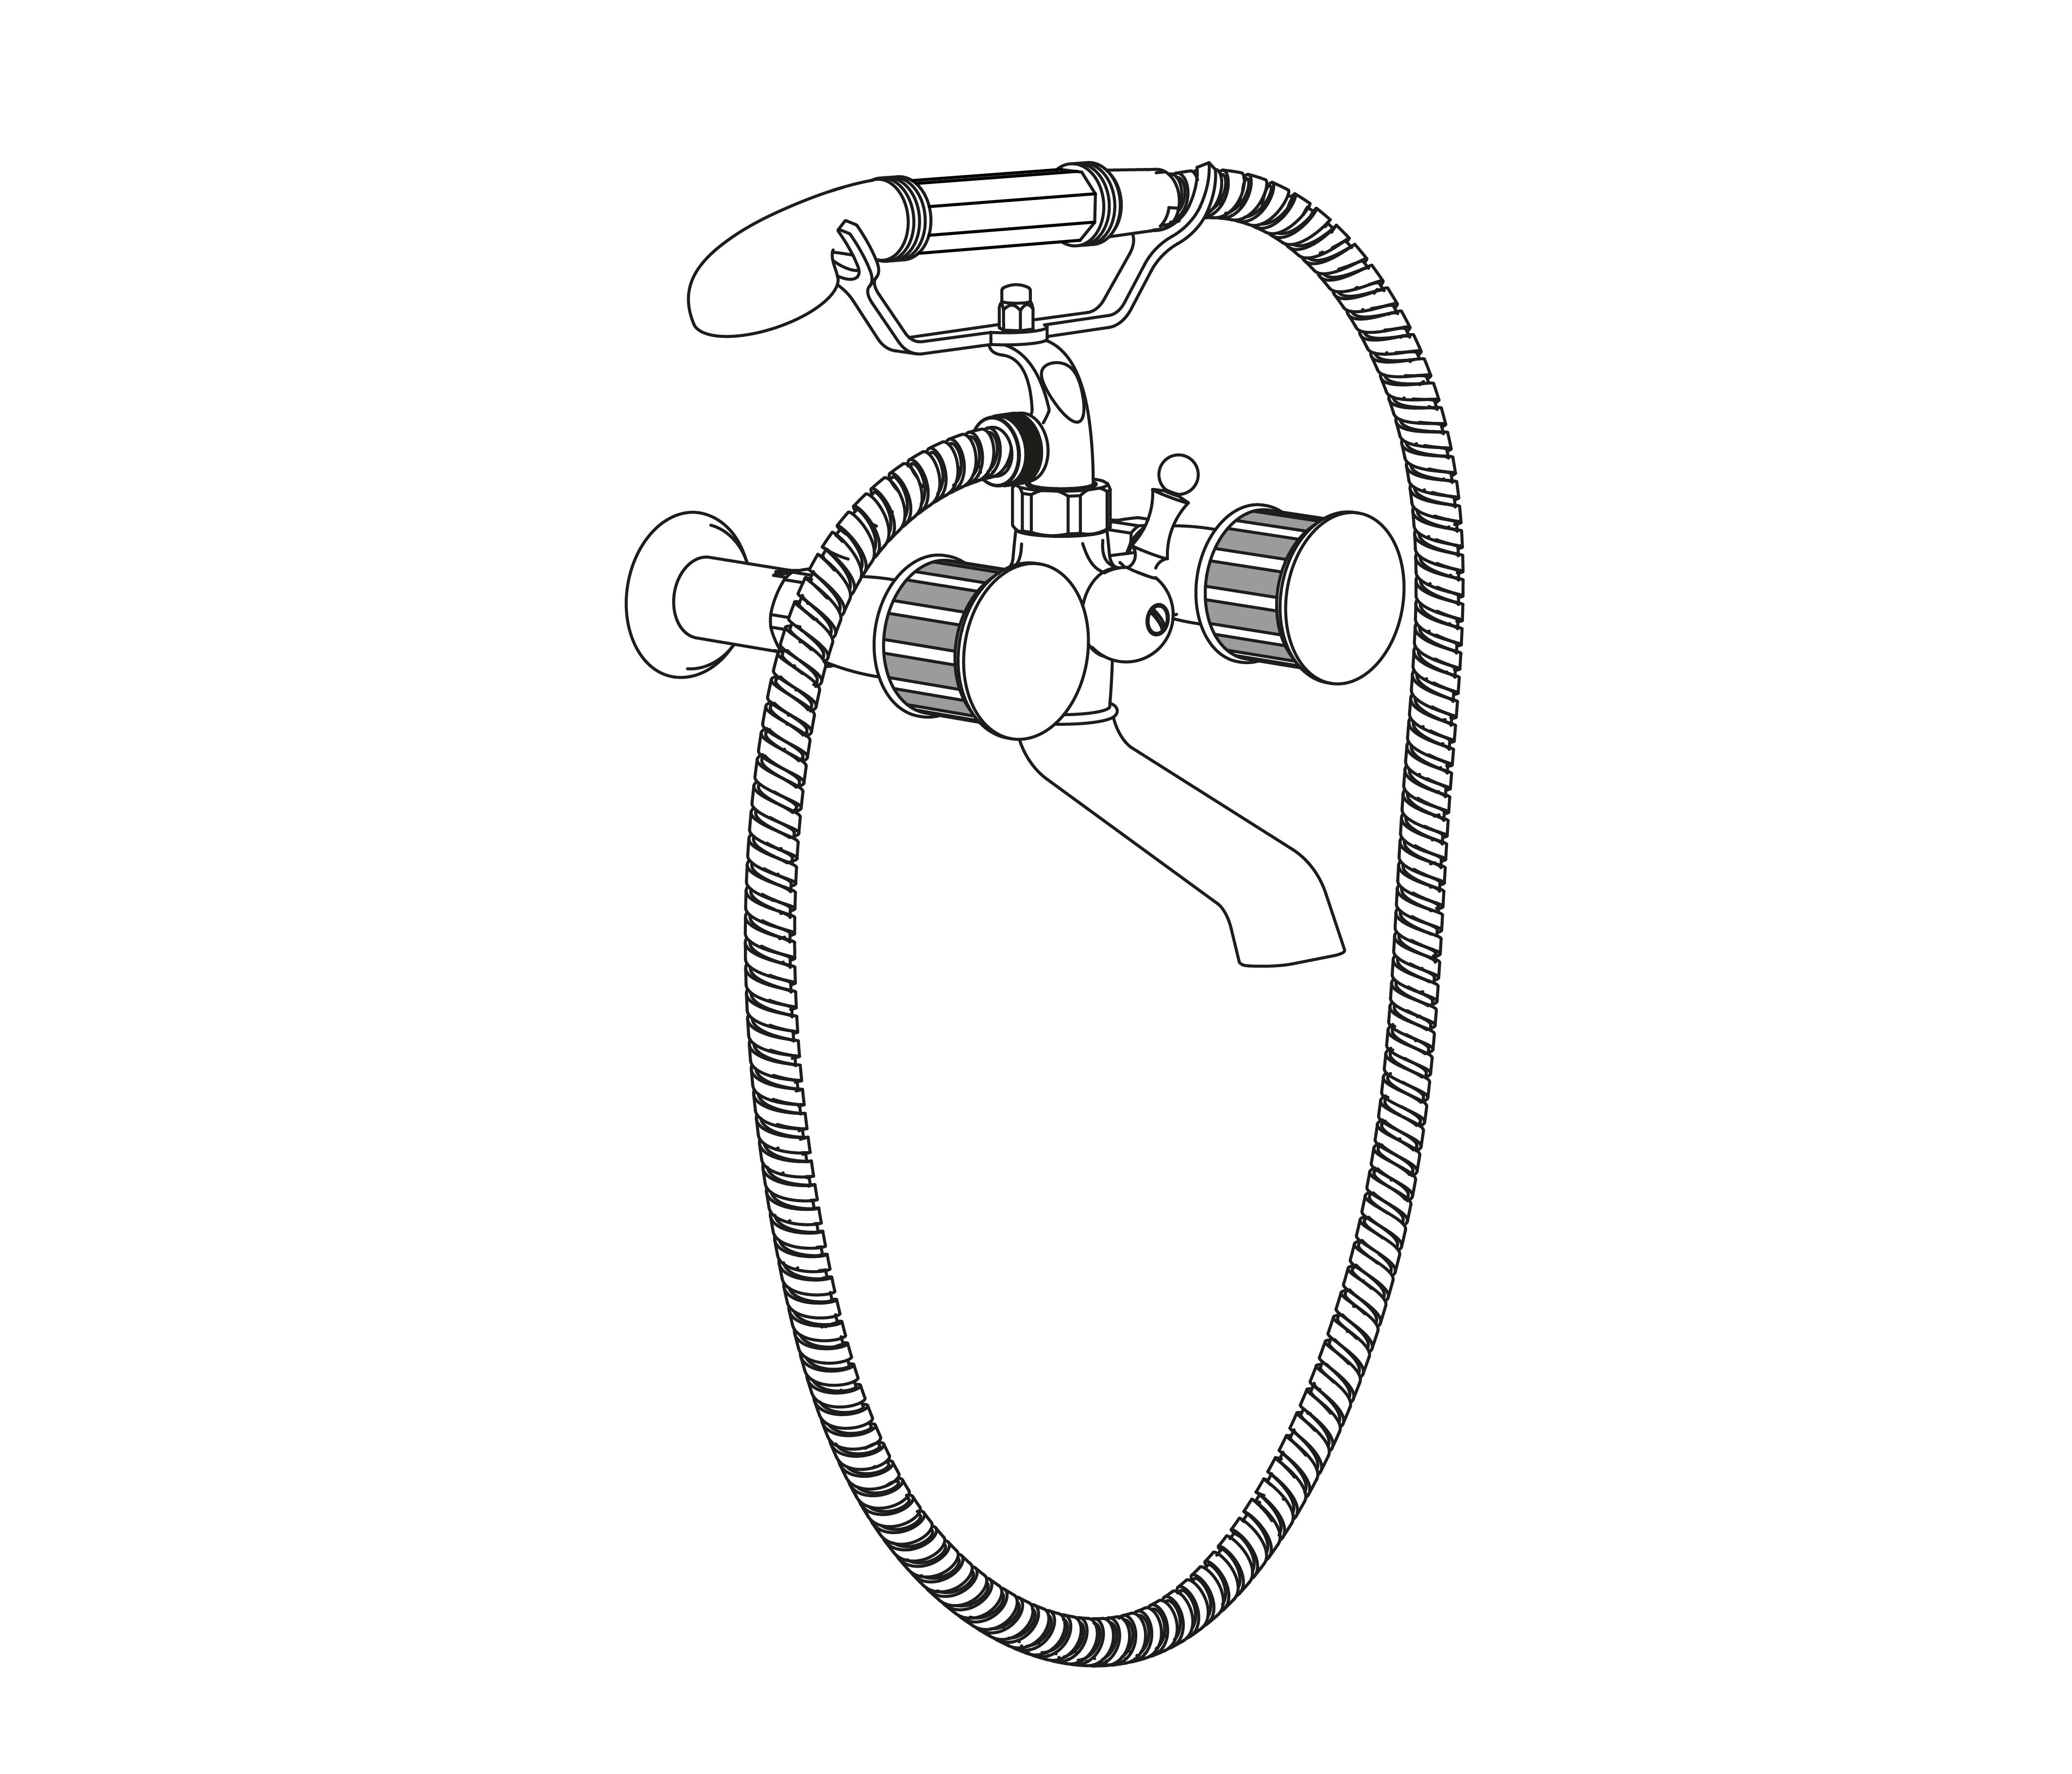 S118-3201 Wall mounted bath and shower mixer